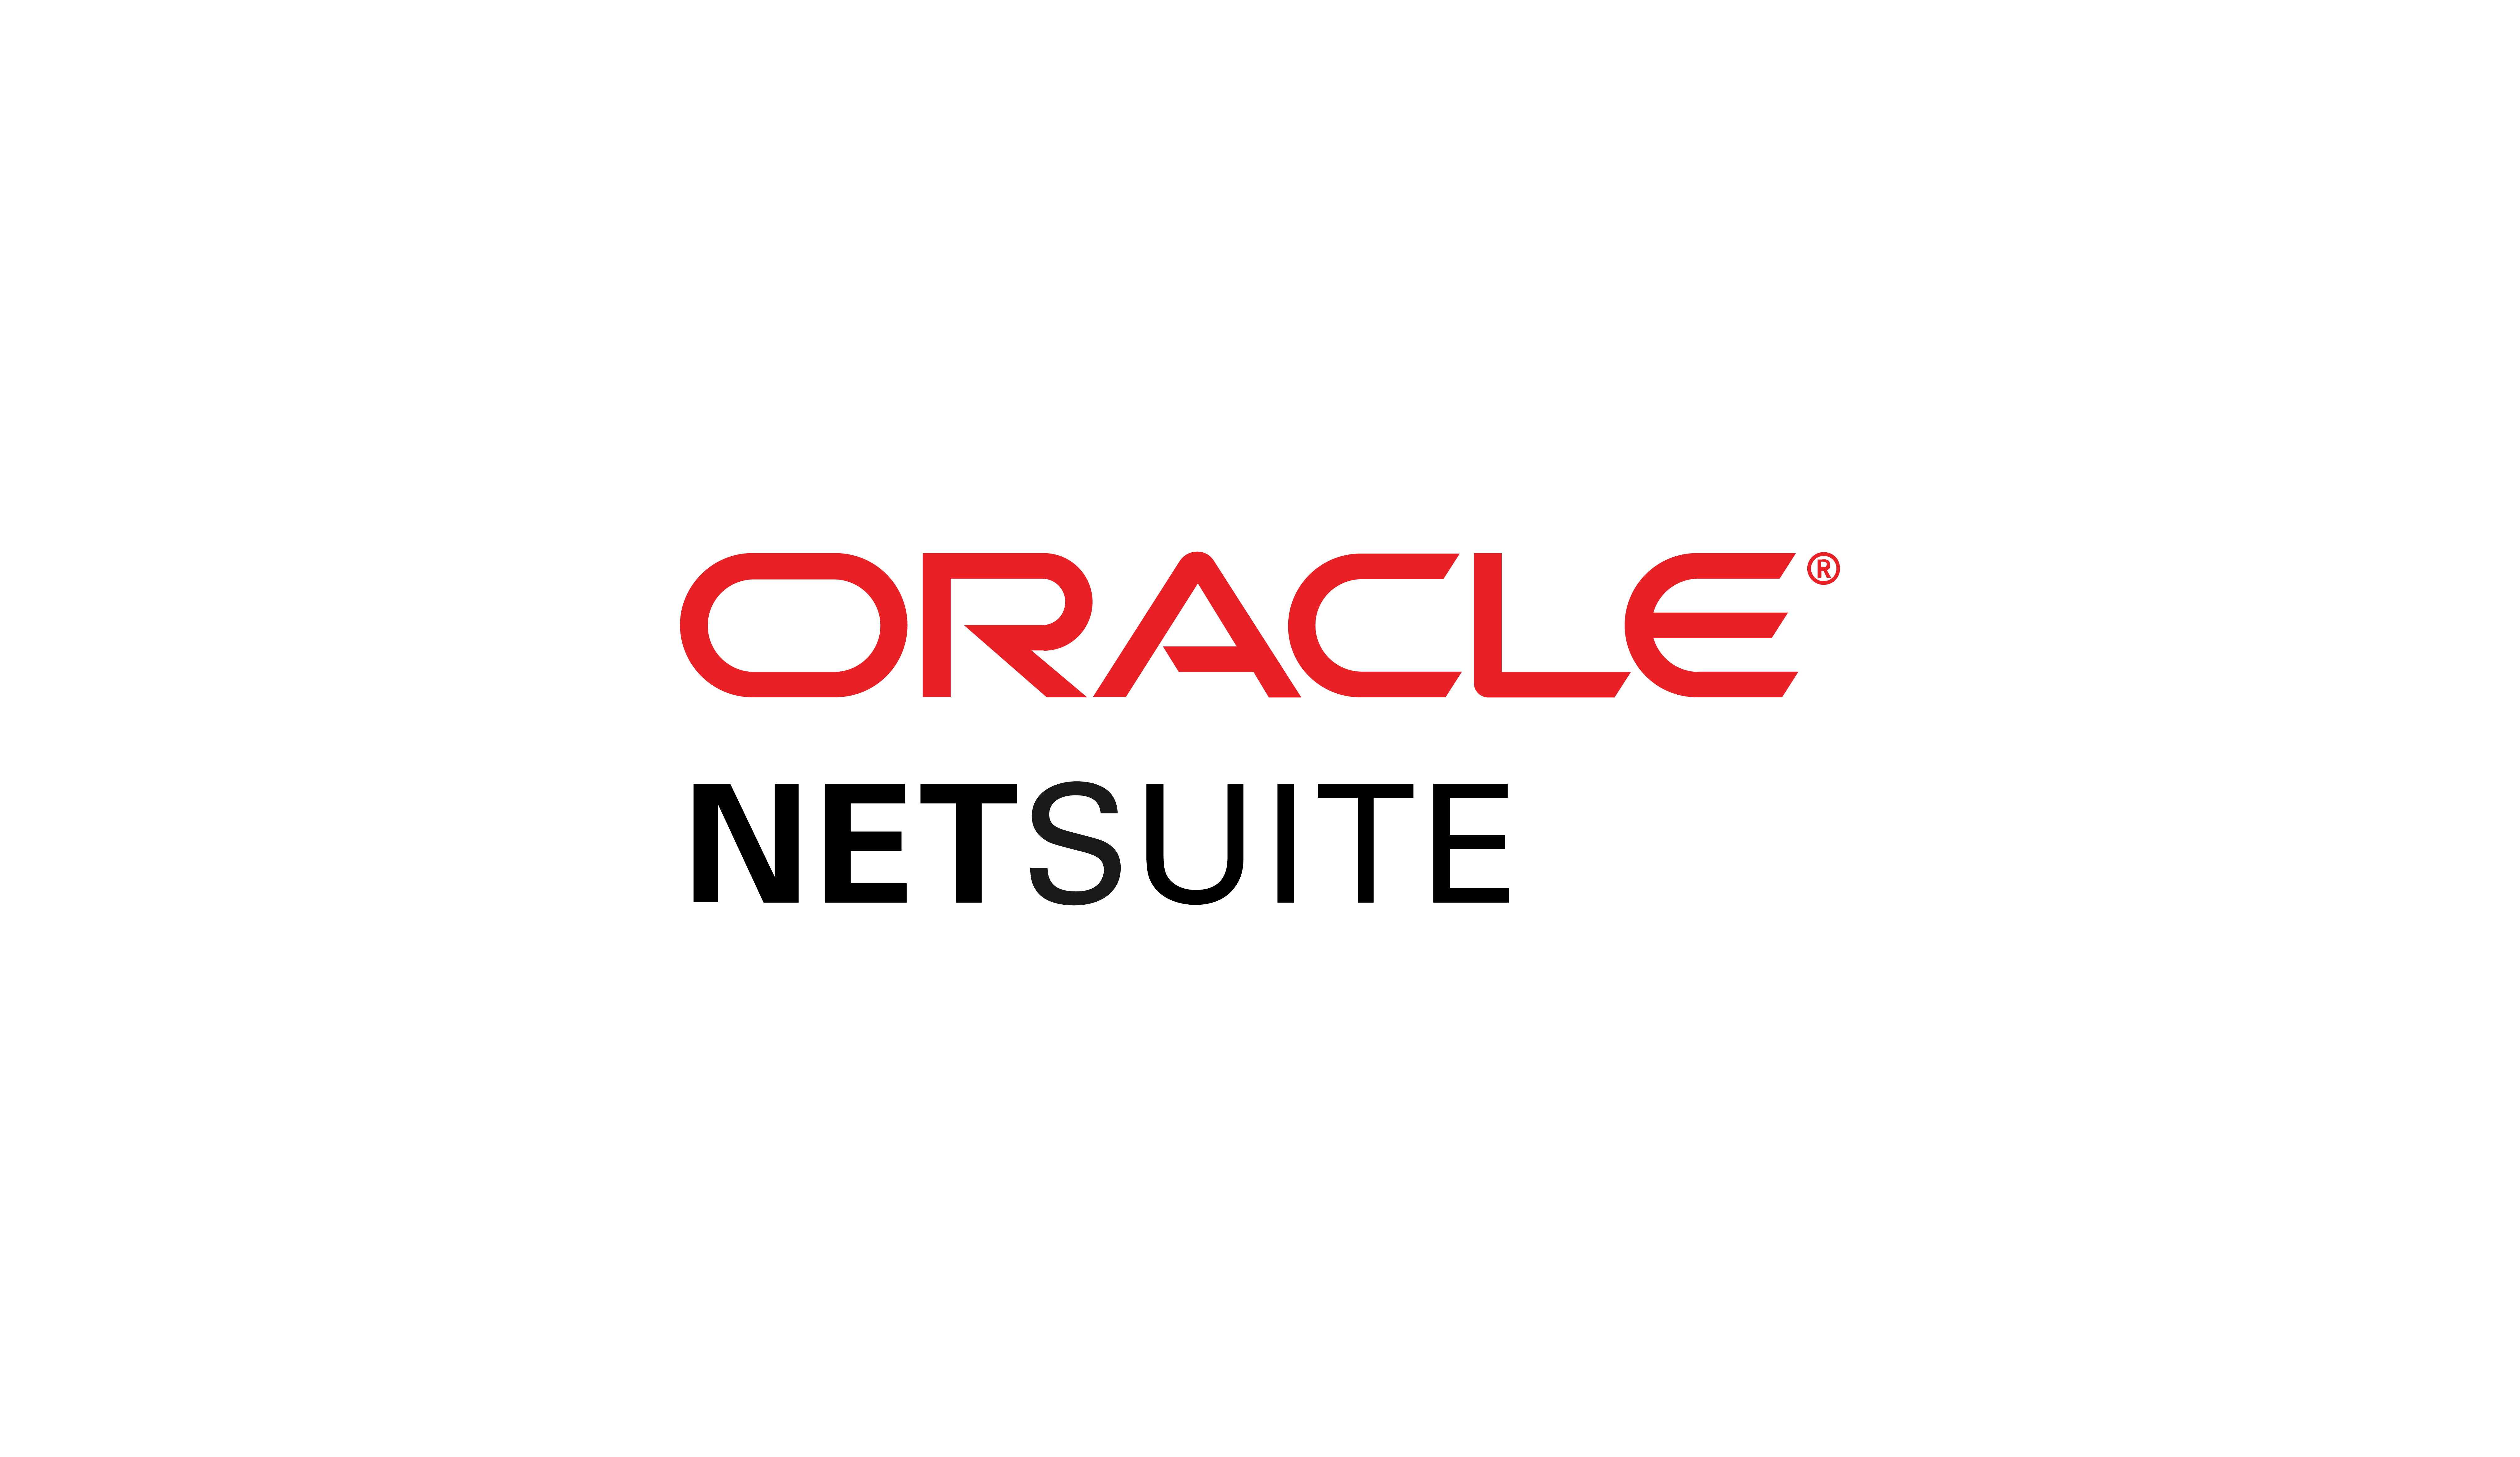 NetSuite Pricing Explained by Financial Advisors & Accountants